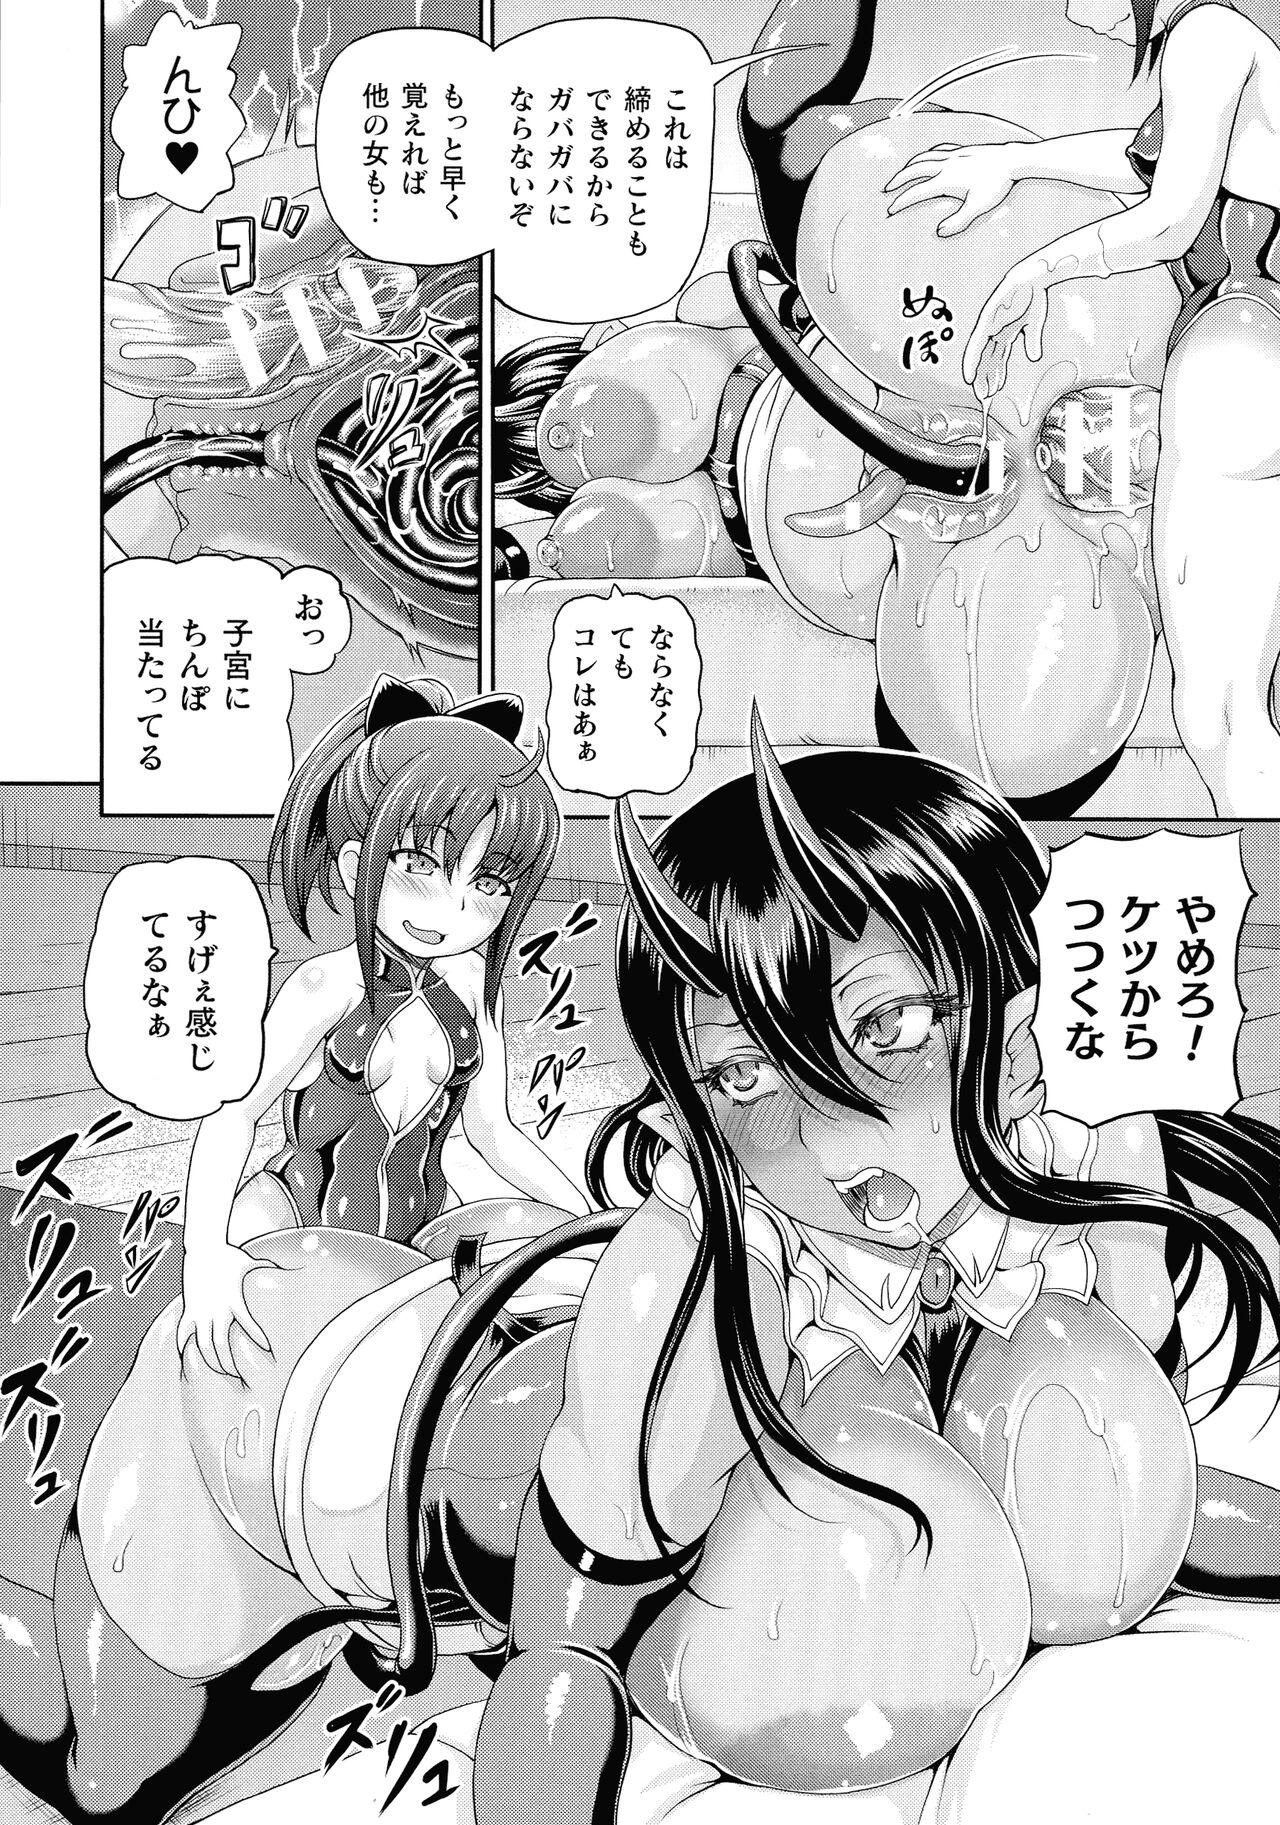 Isekai Shoukan 3 - Brothel in Another World 47